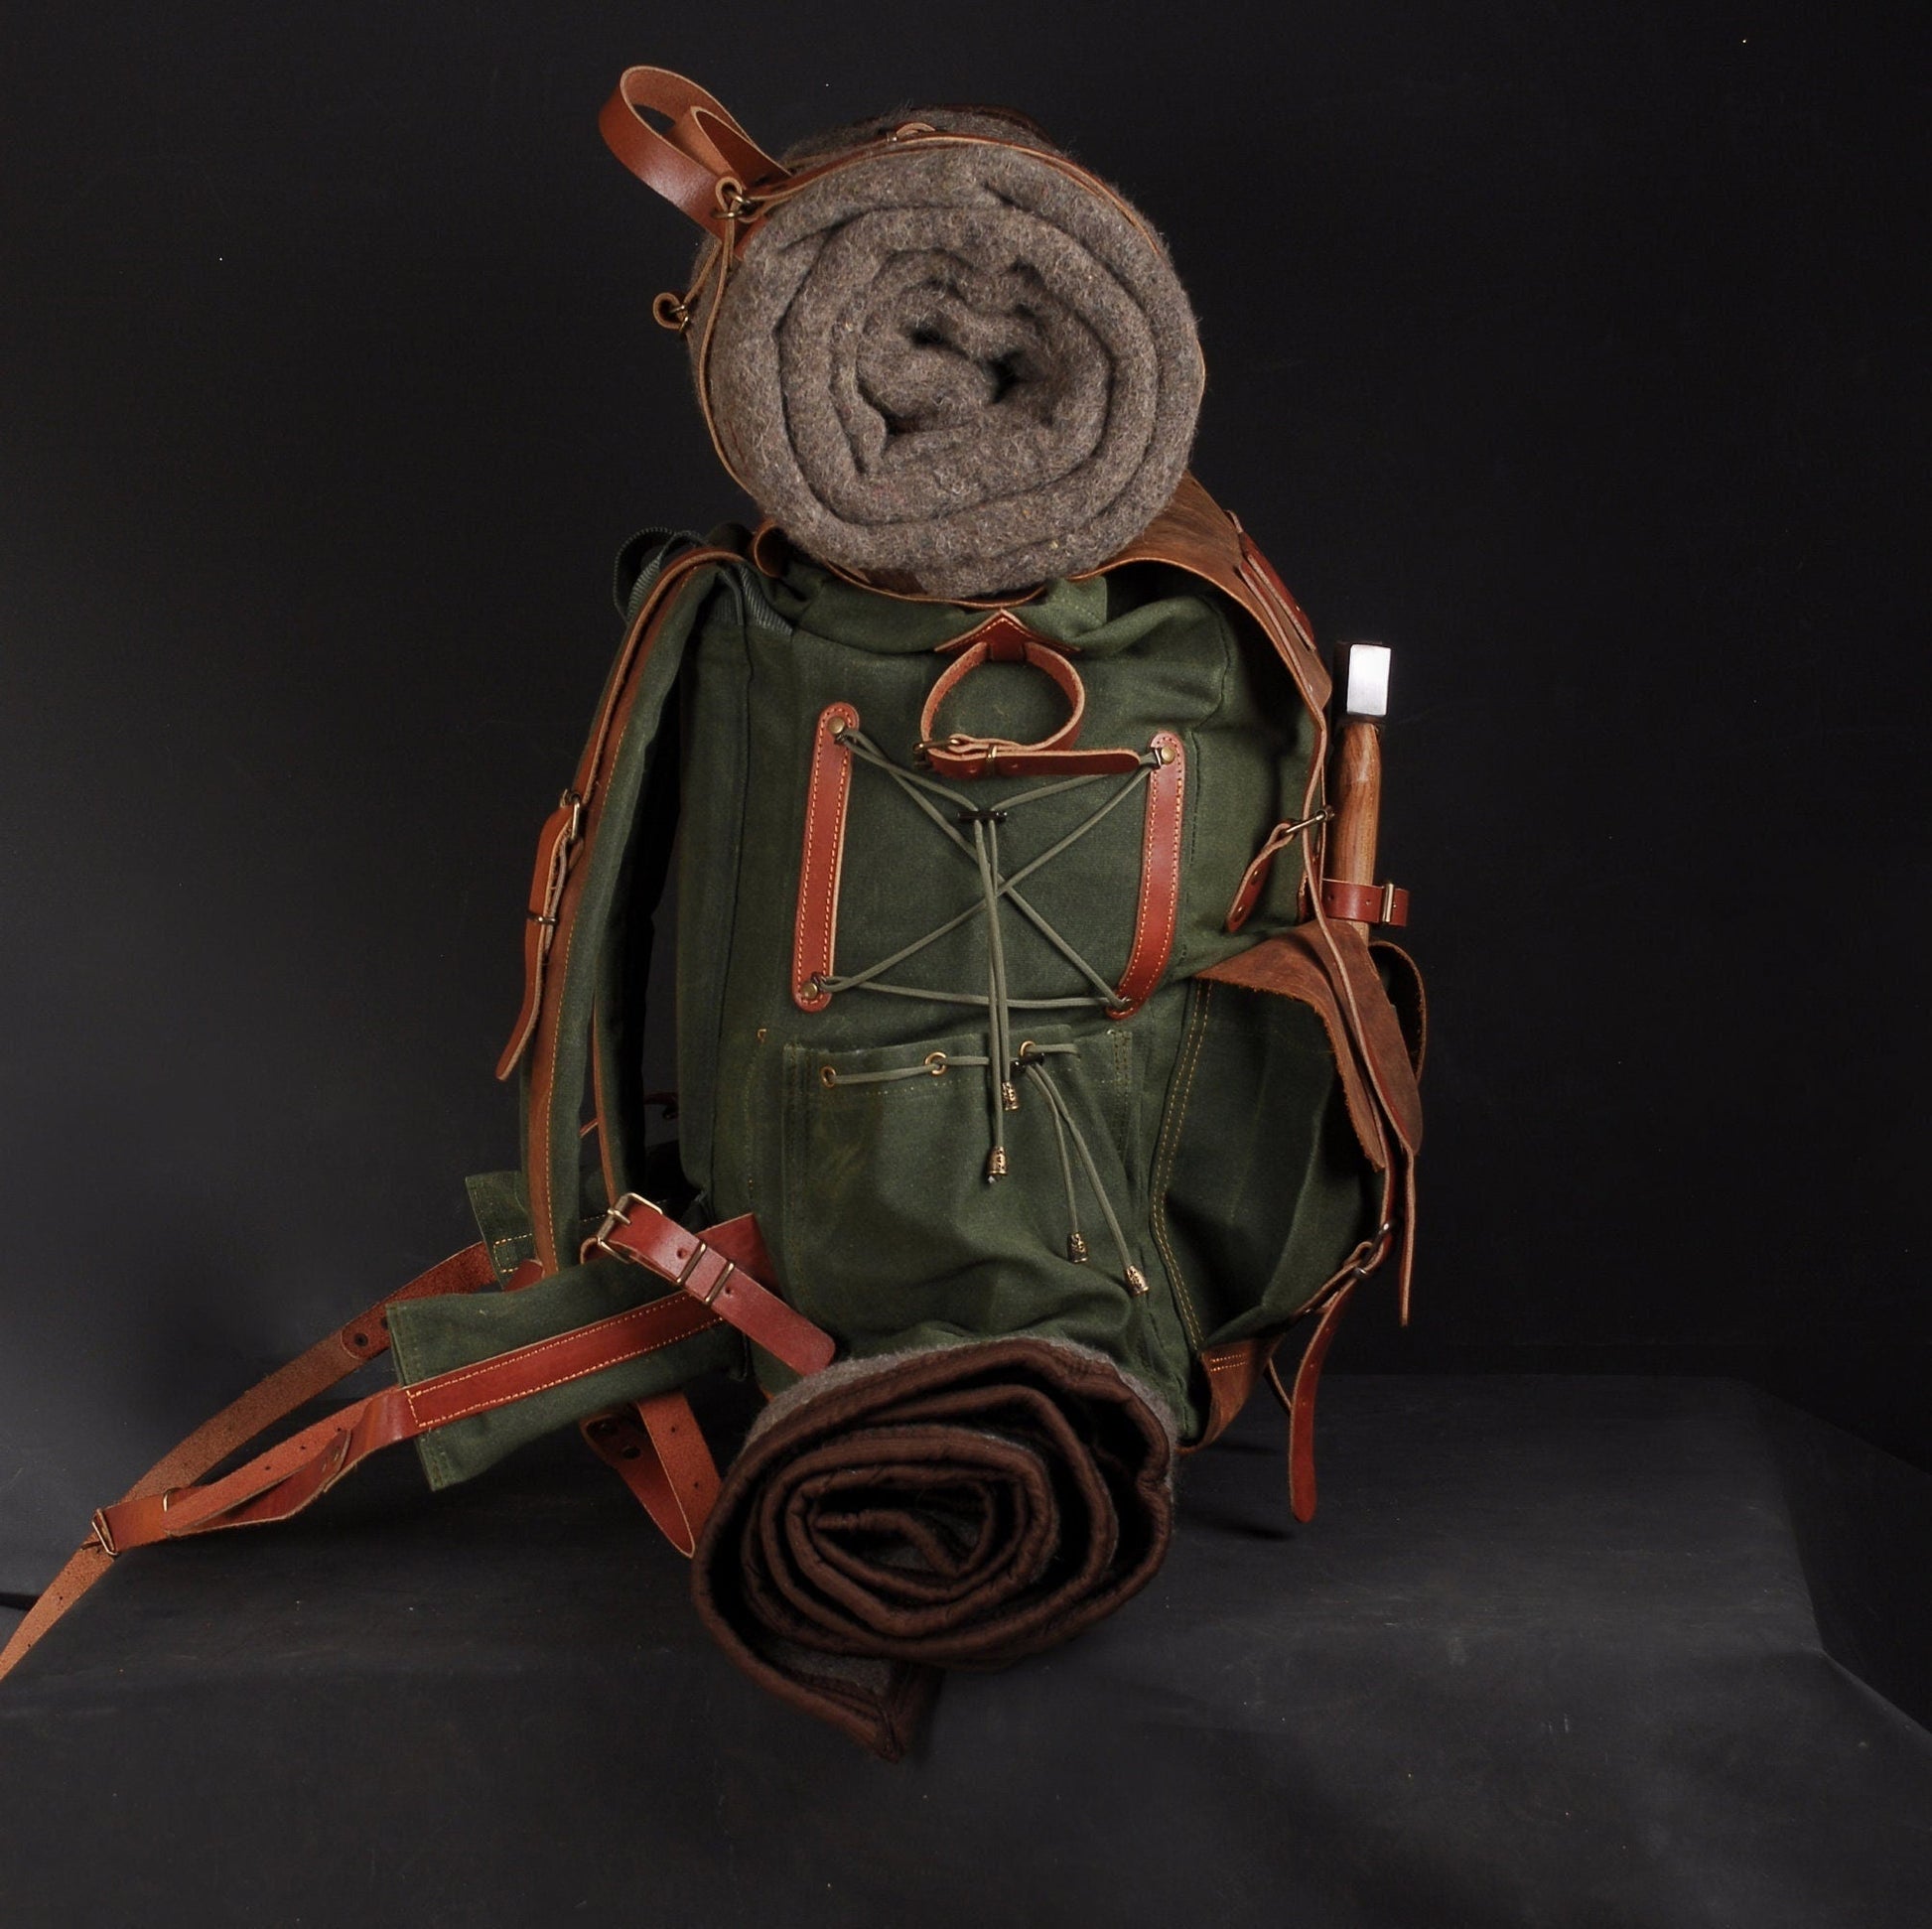 Camping Backpack | Camping Backpacks | 24 Hours Tested Backpack | 30 Liter to 50L Size Options | Brown, Green, Black, Black, White Colors bushcraft backpack - camping backpack - hiking backpack 99percenthandmade   